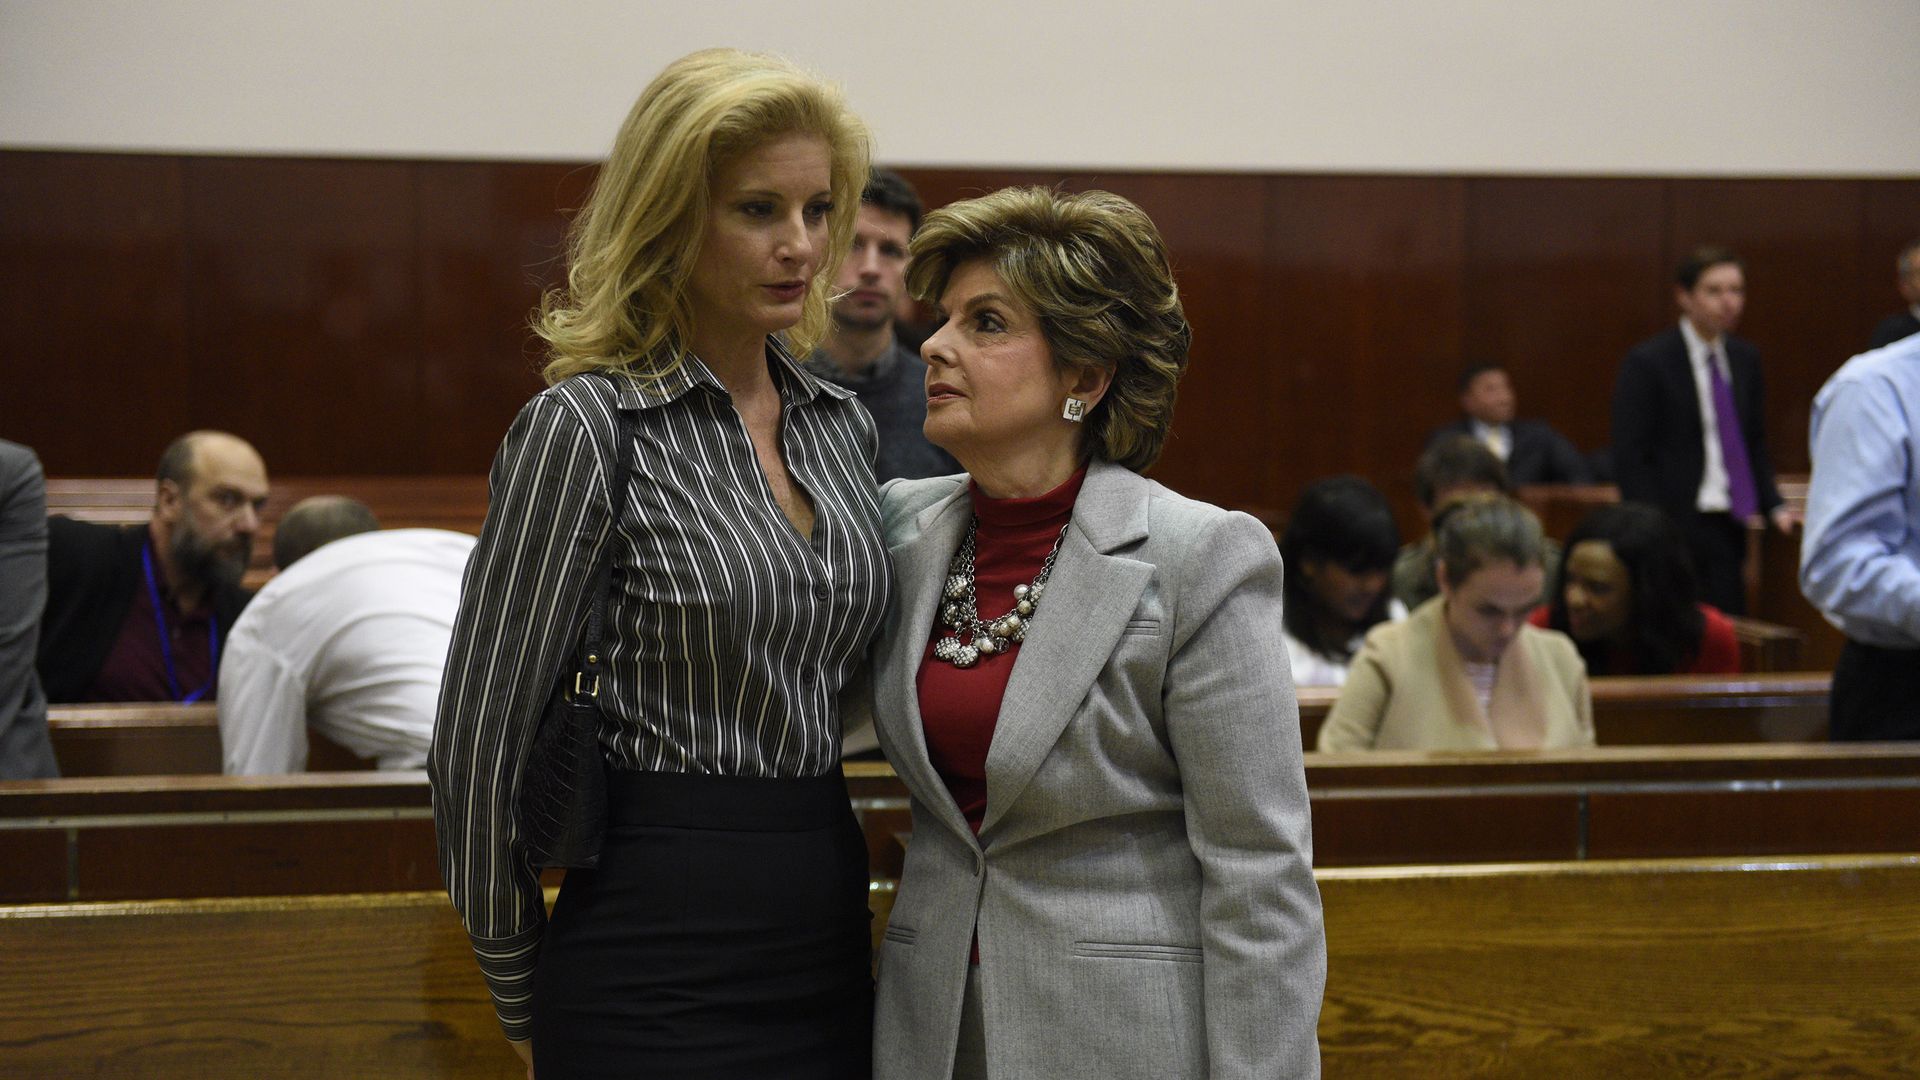 Picture of Summer Zervos standing next to her lawyer